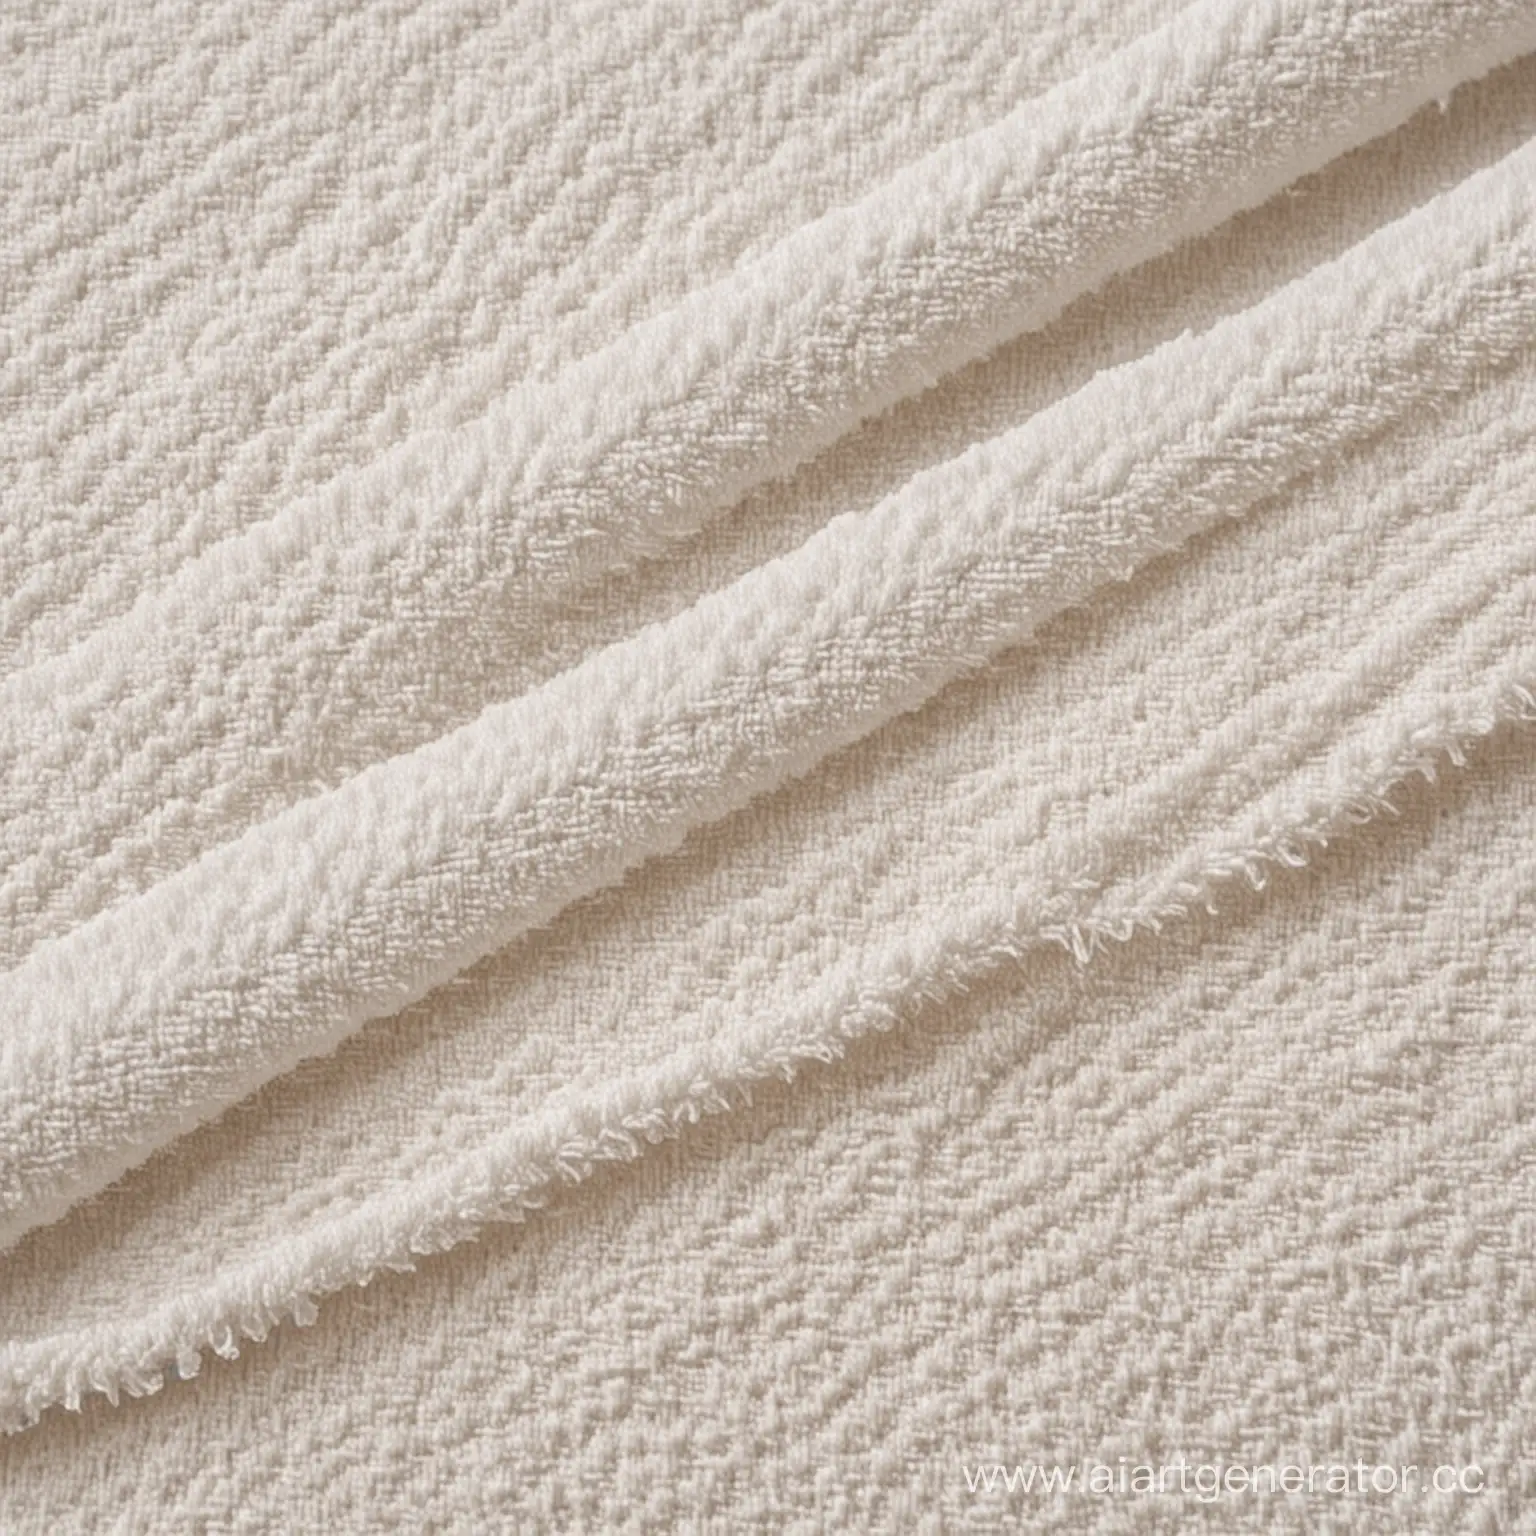 Soft-and-Absorbent-Terry-Cloth-Fabric-Texture-Background